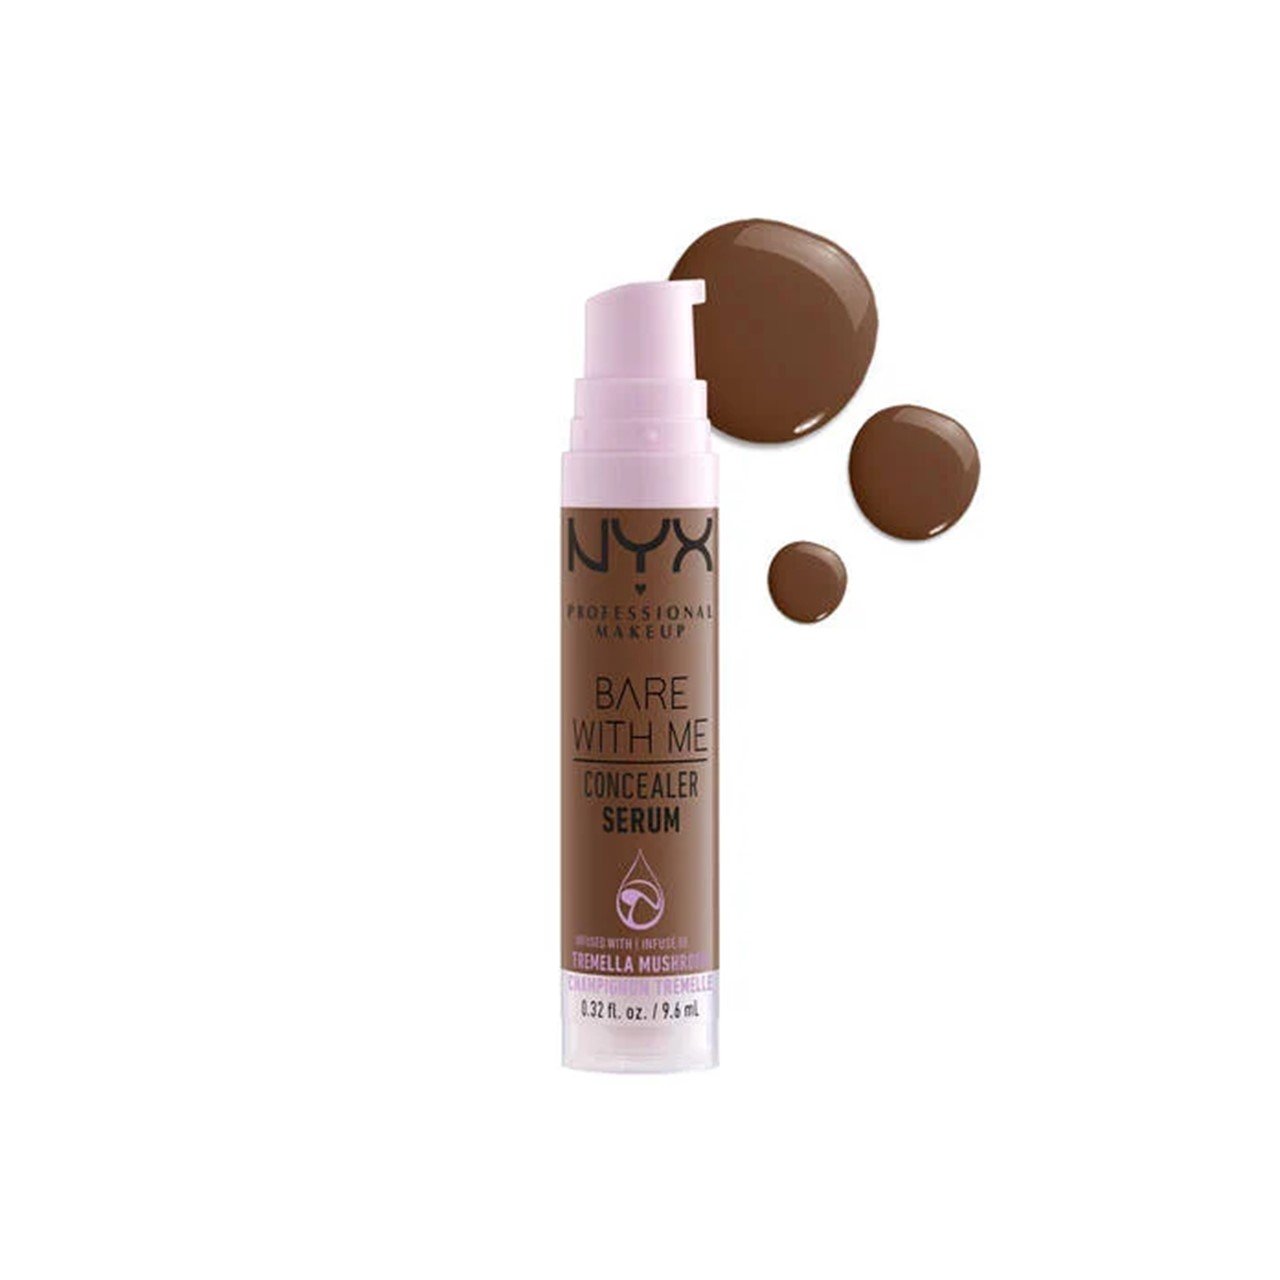 Pro Rich Me Serum Bare · USA 9.6ml Concealer Makeup NYX 12 With Buy